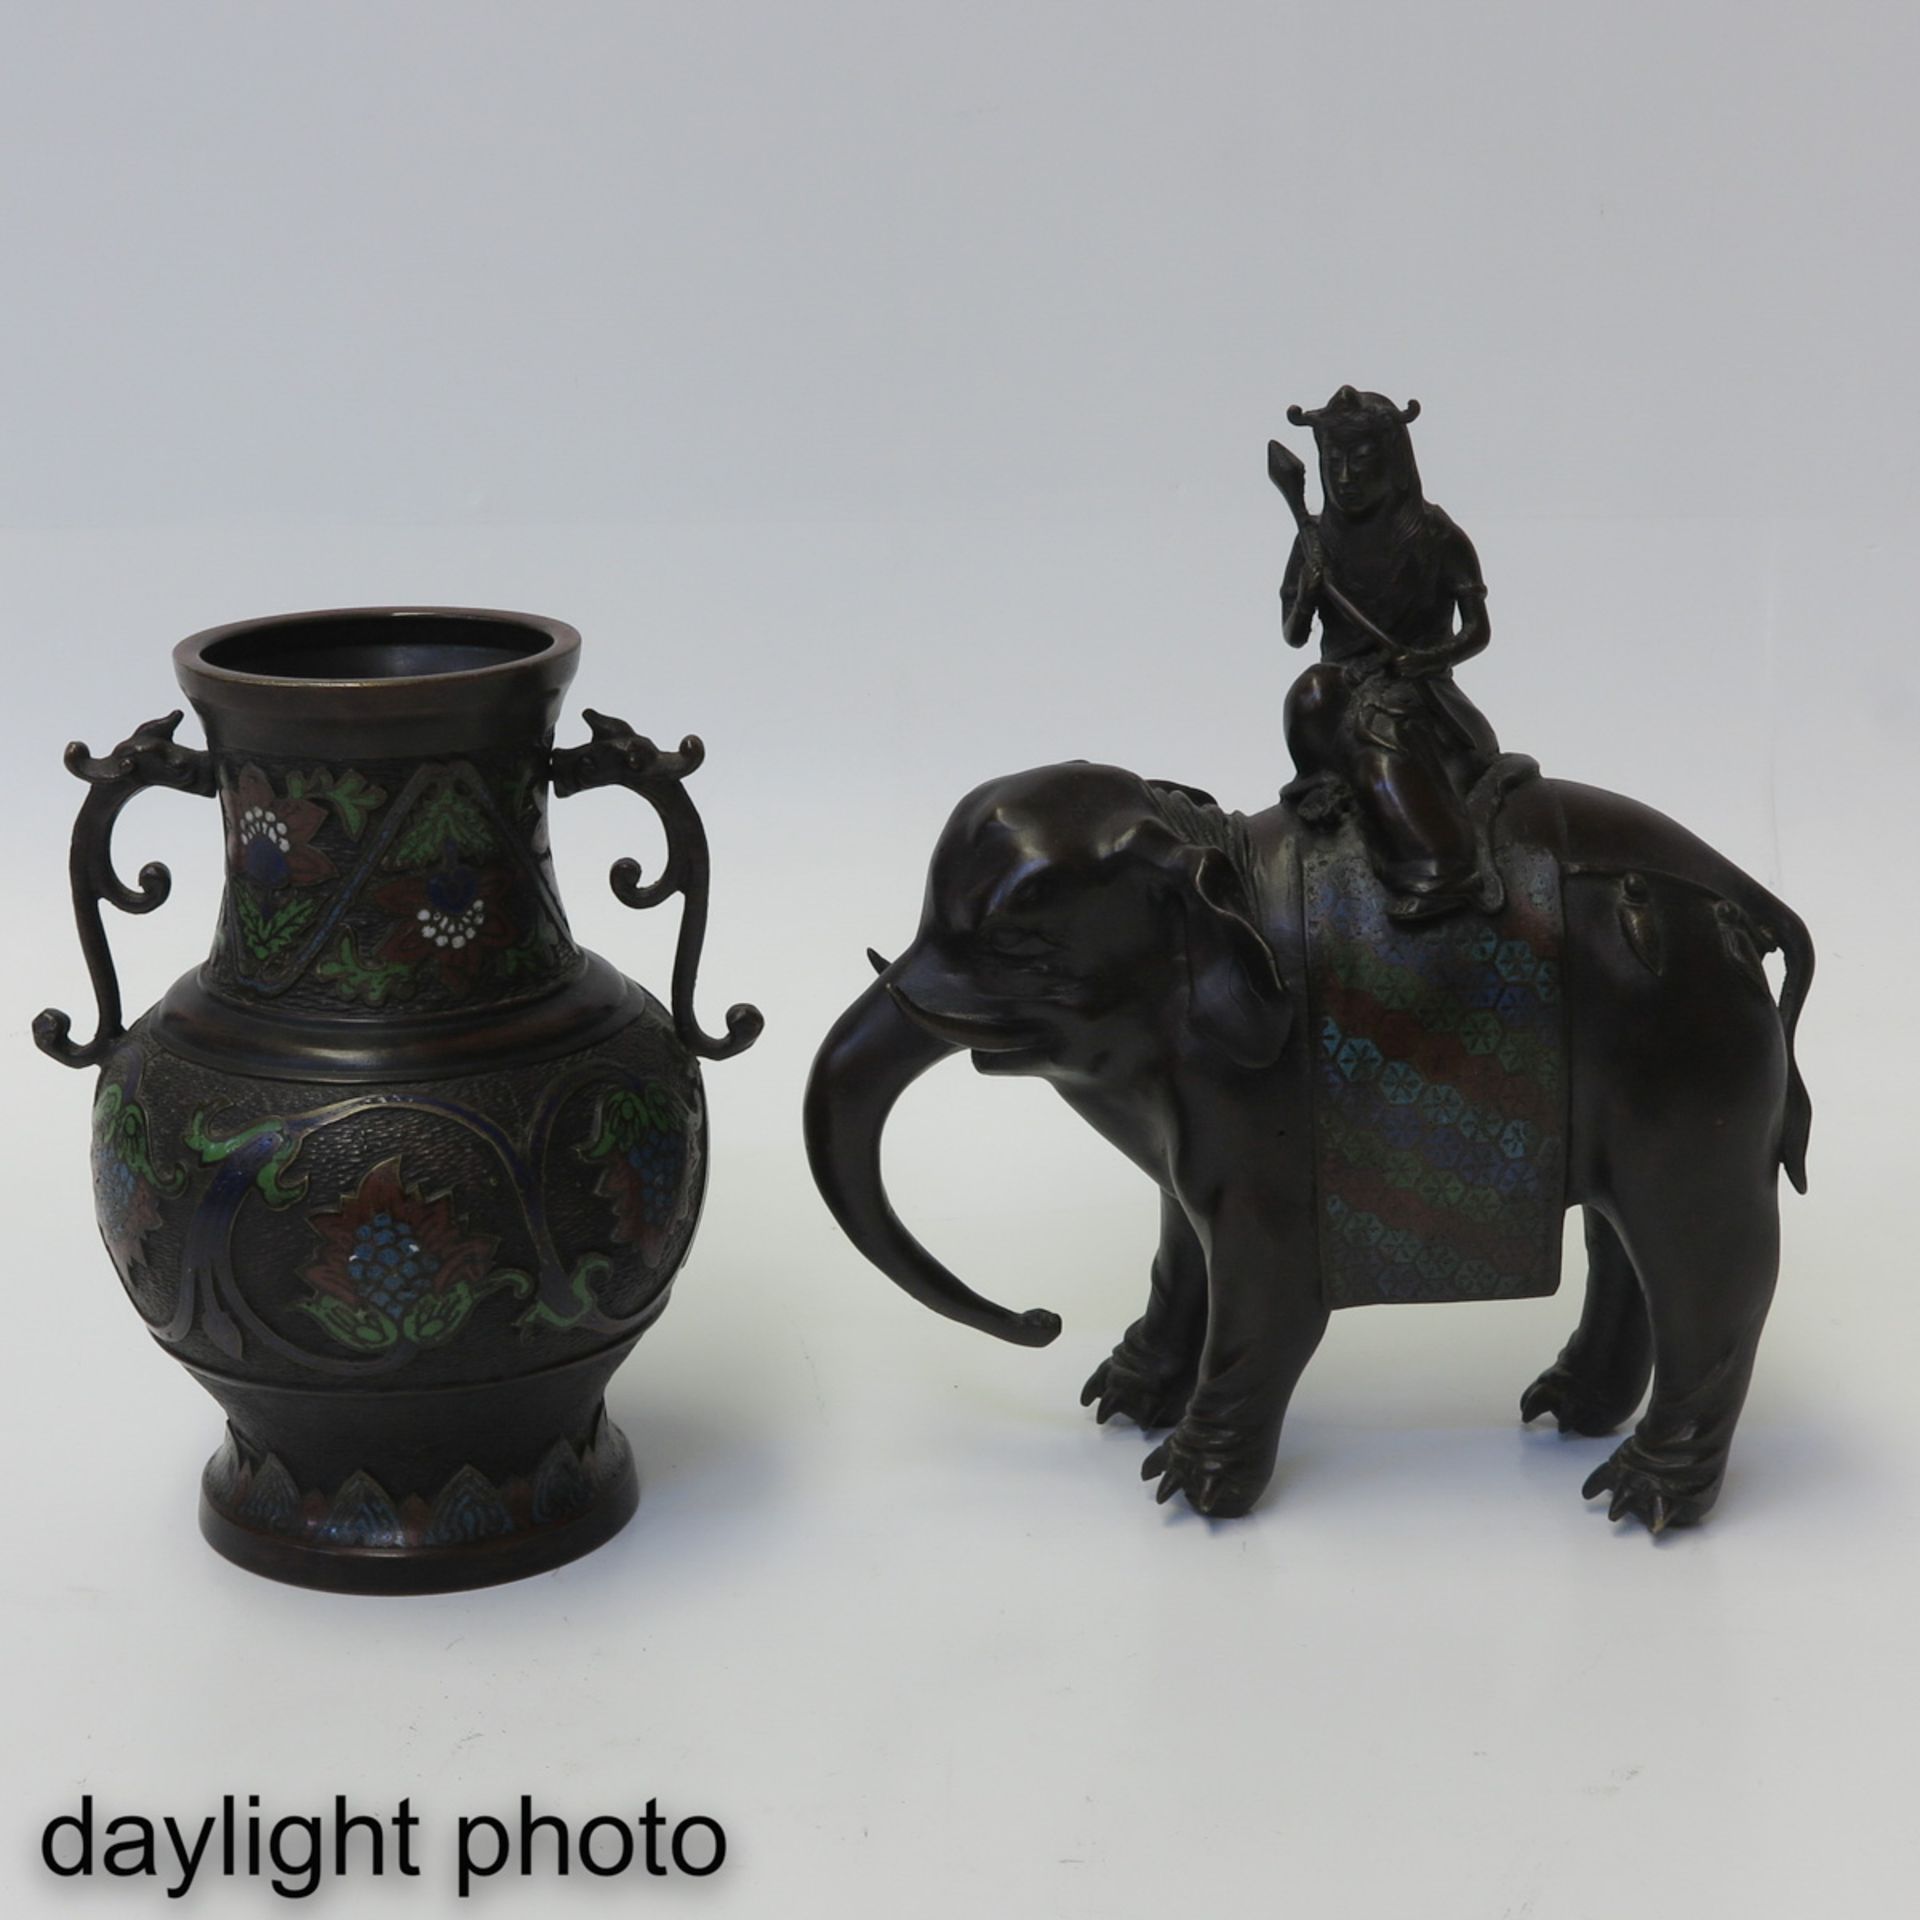 A Cloisonne Sculpture and Vase - Image 7 of 10